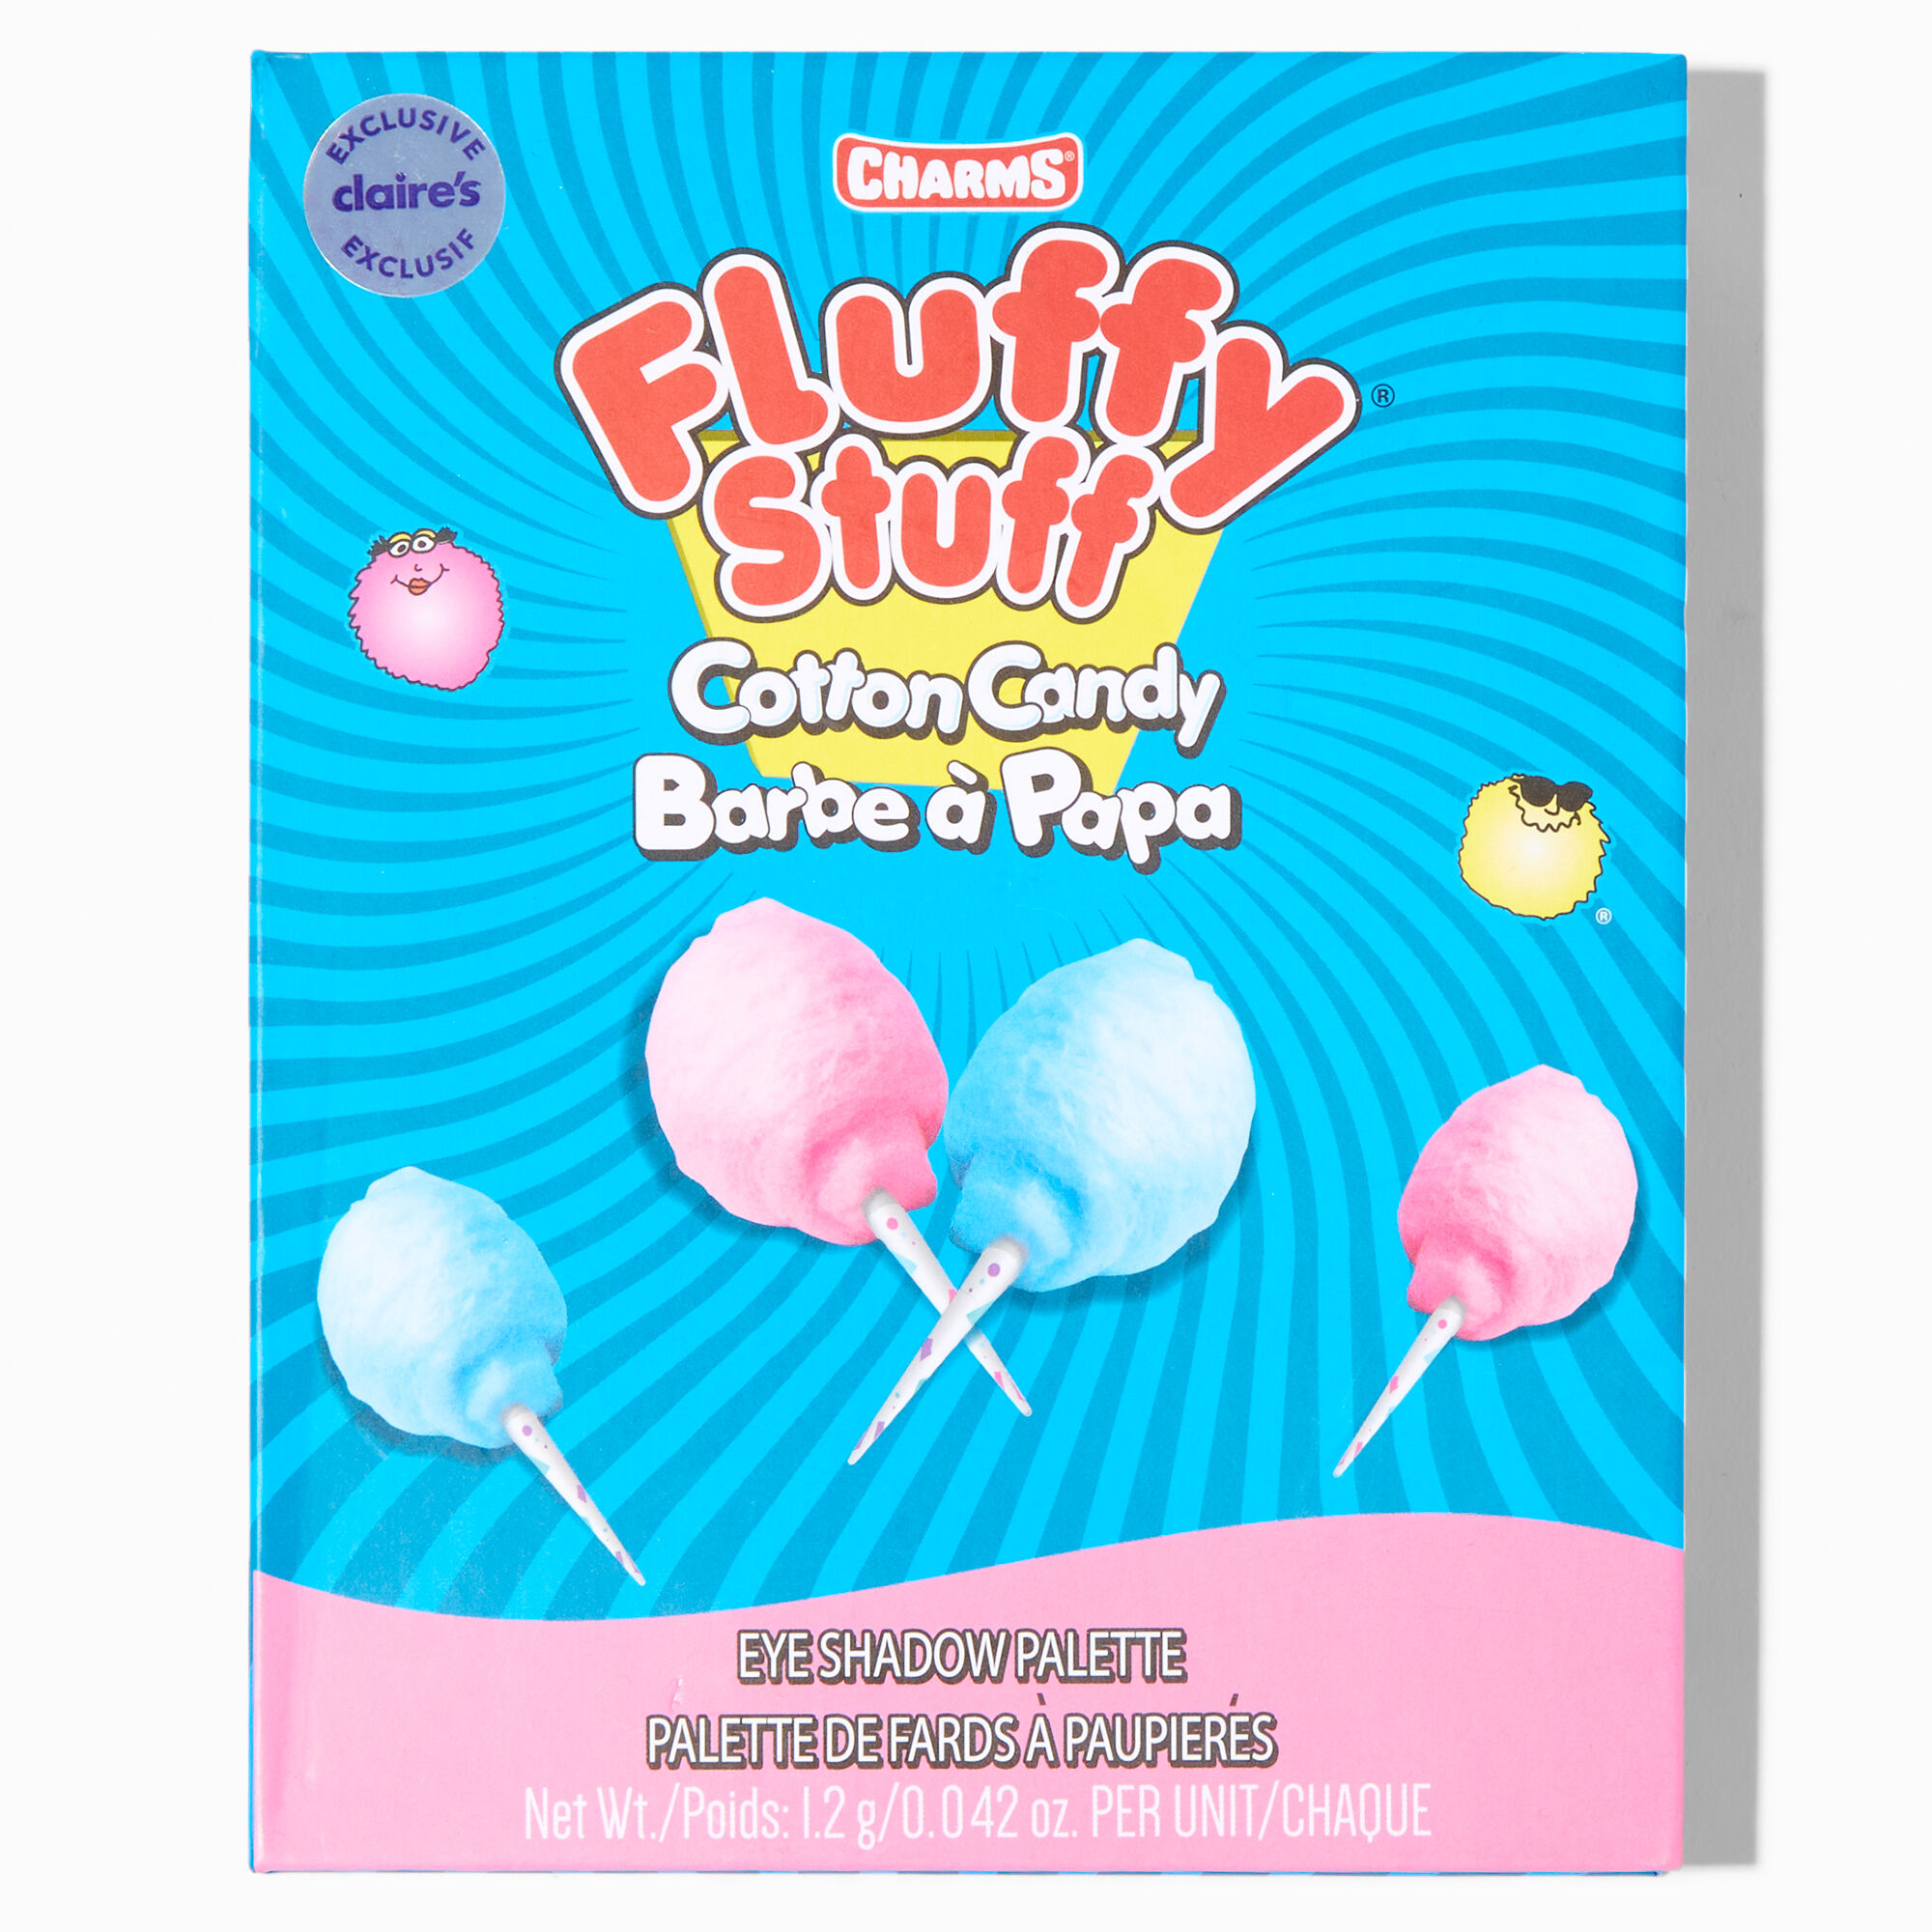 View Charms Fluffy Stuff Claires Exclusive Eyeshadow Palette information